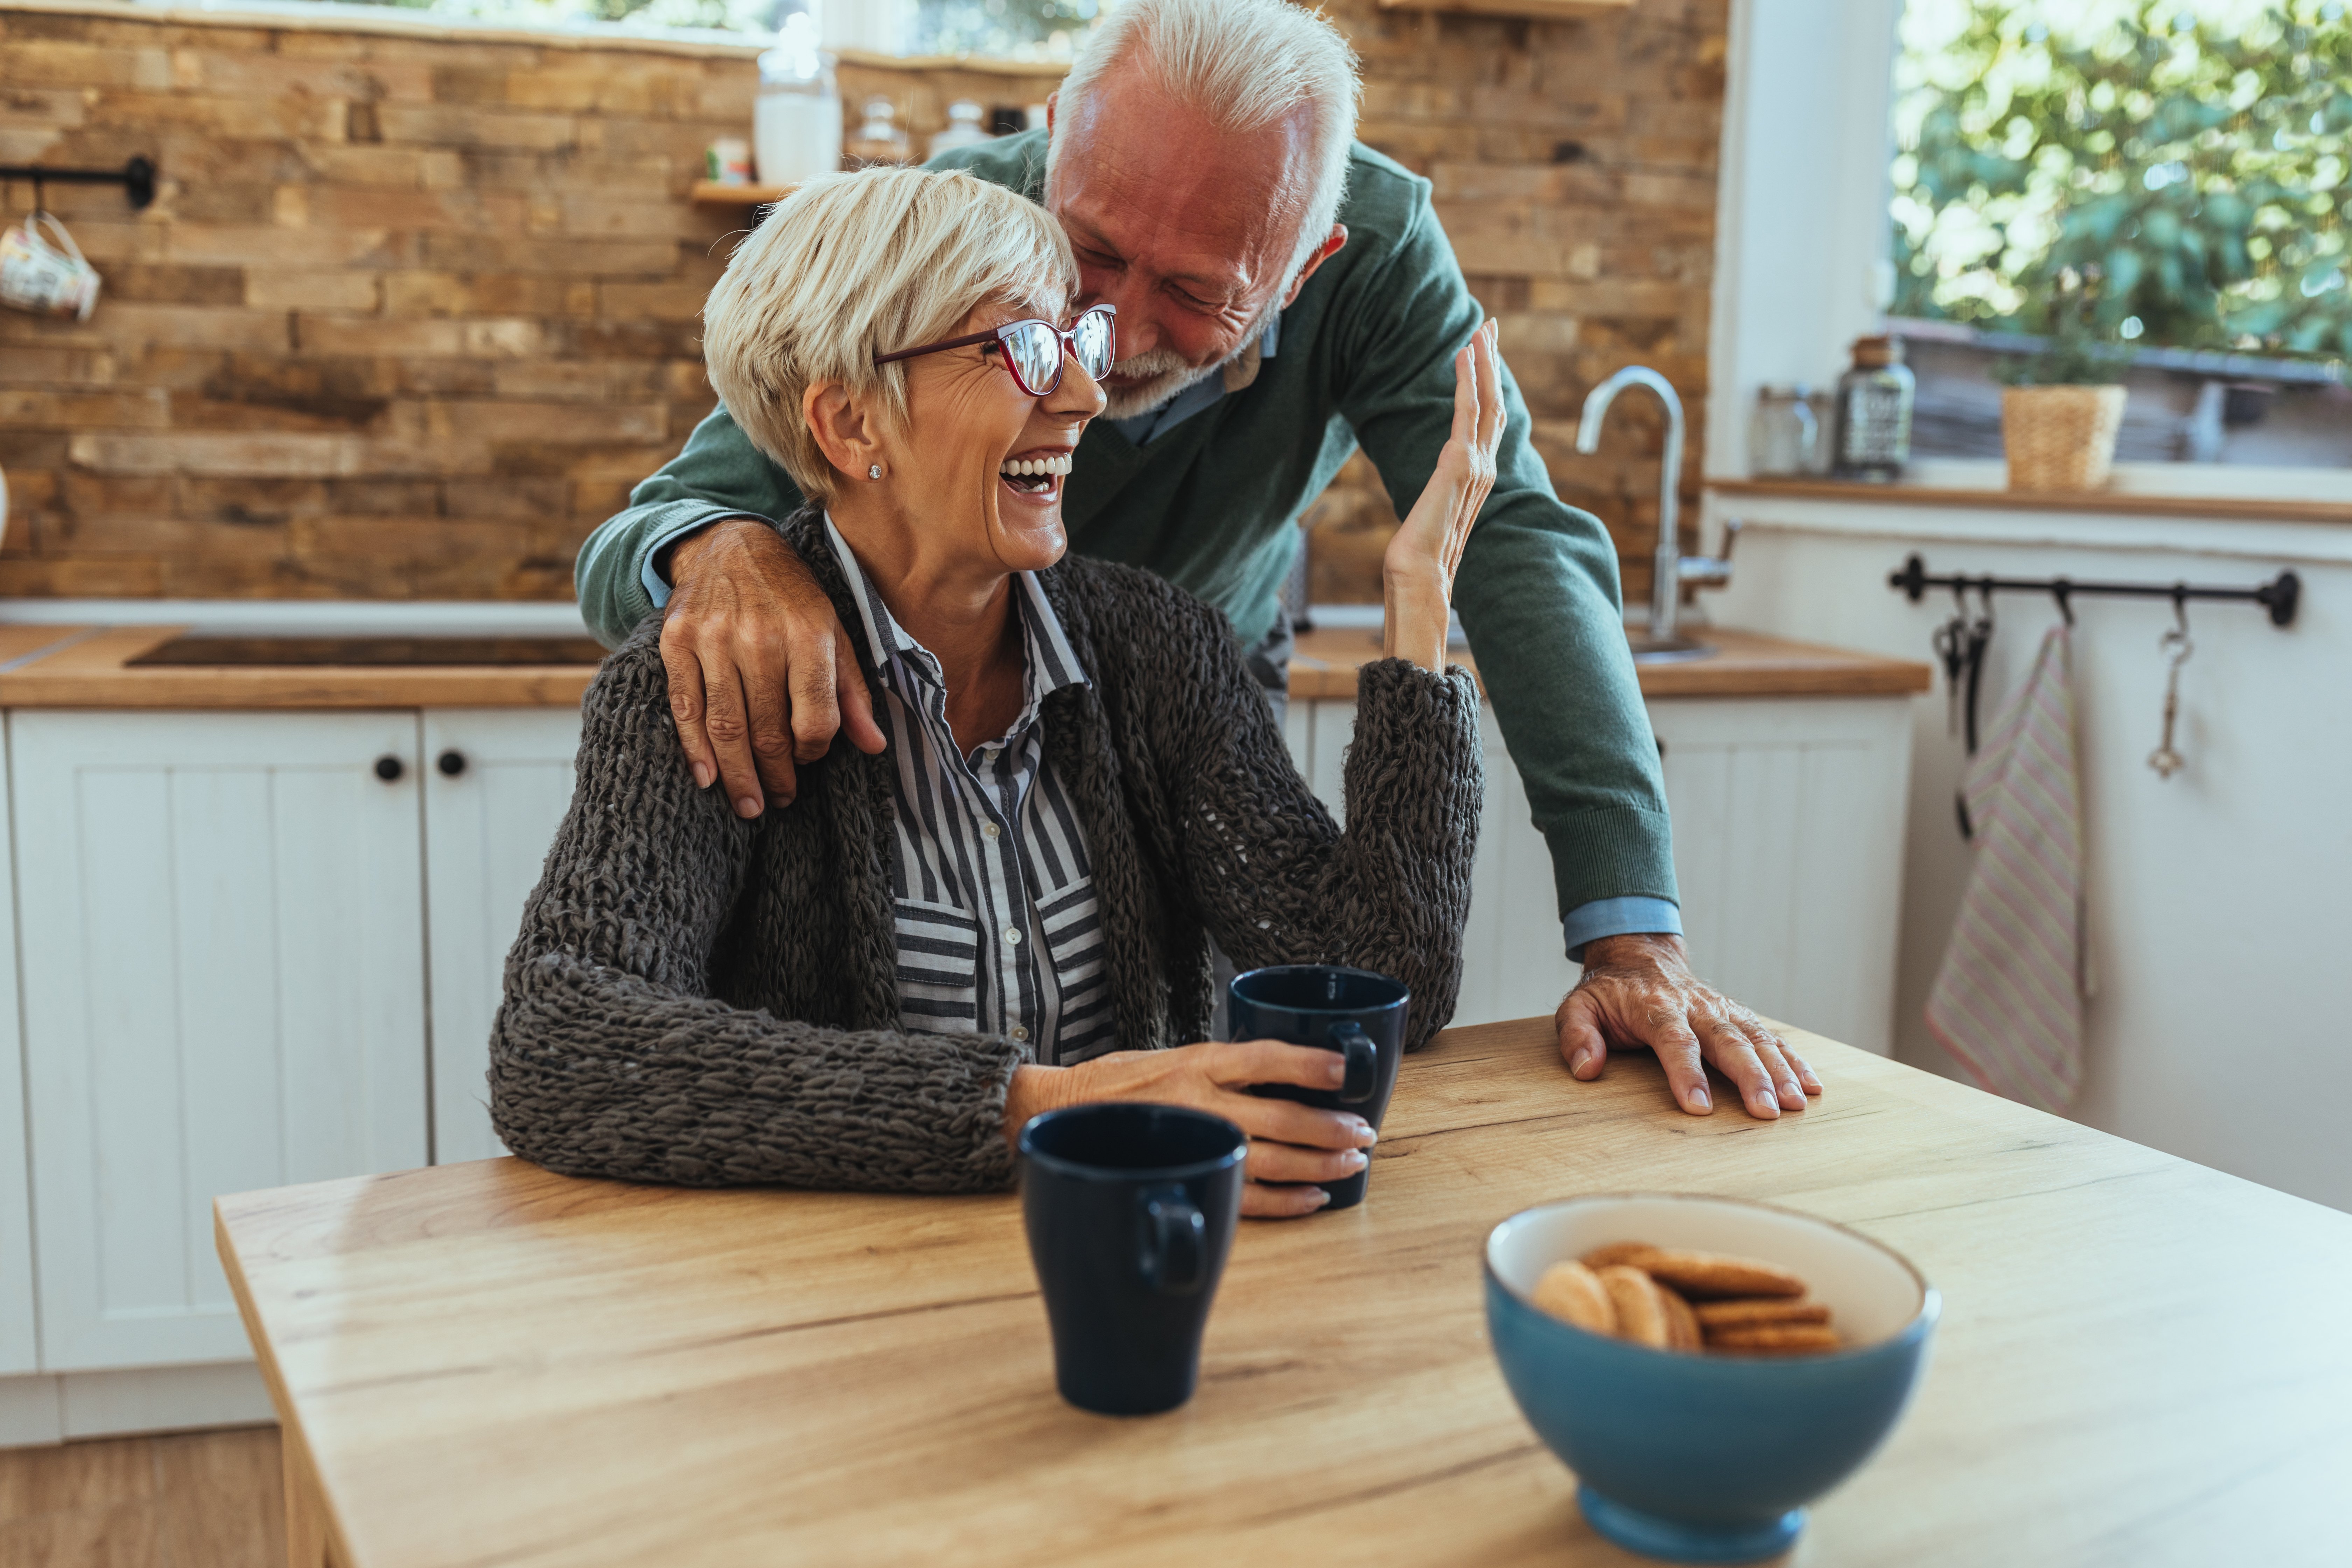 An older couple laughing together | Photo: Shutterstock